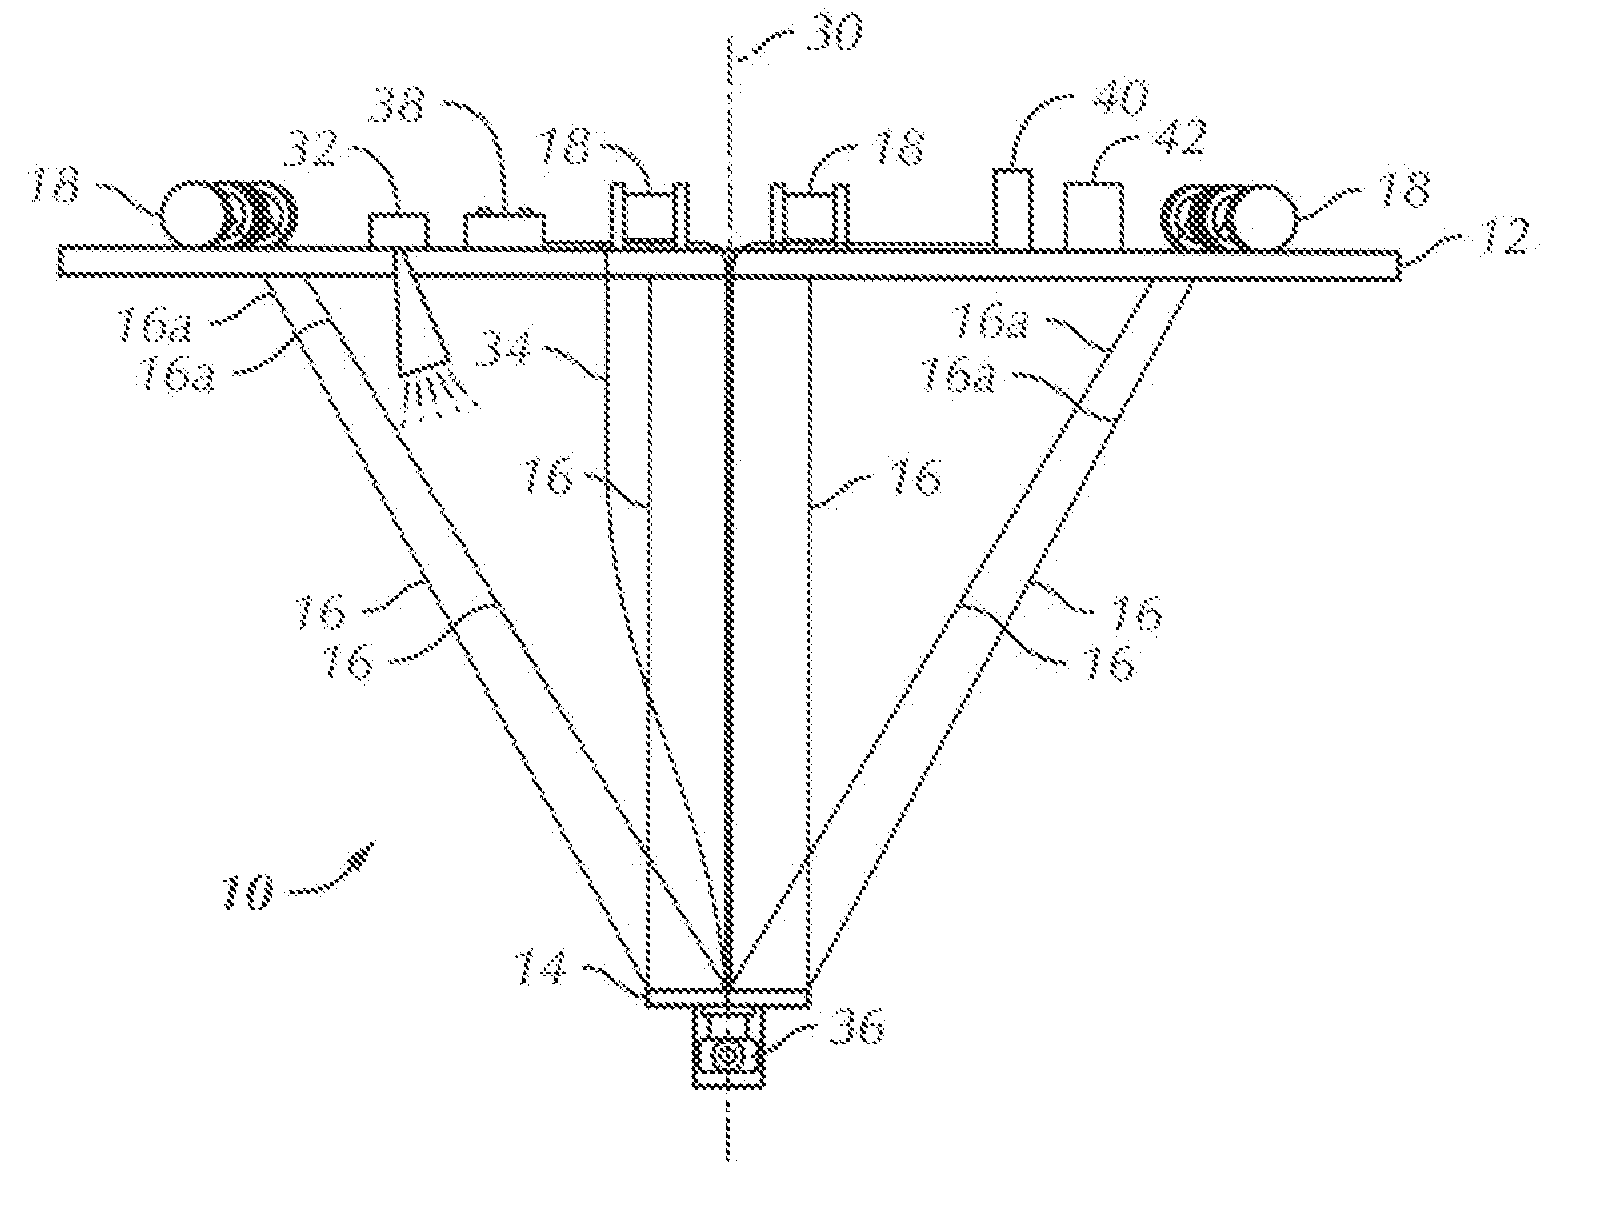 Aerial support structure and method for image capture